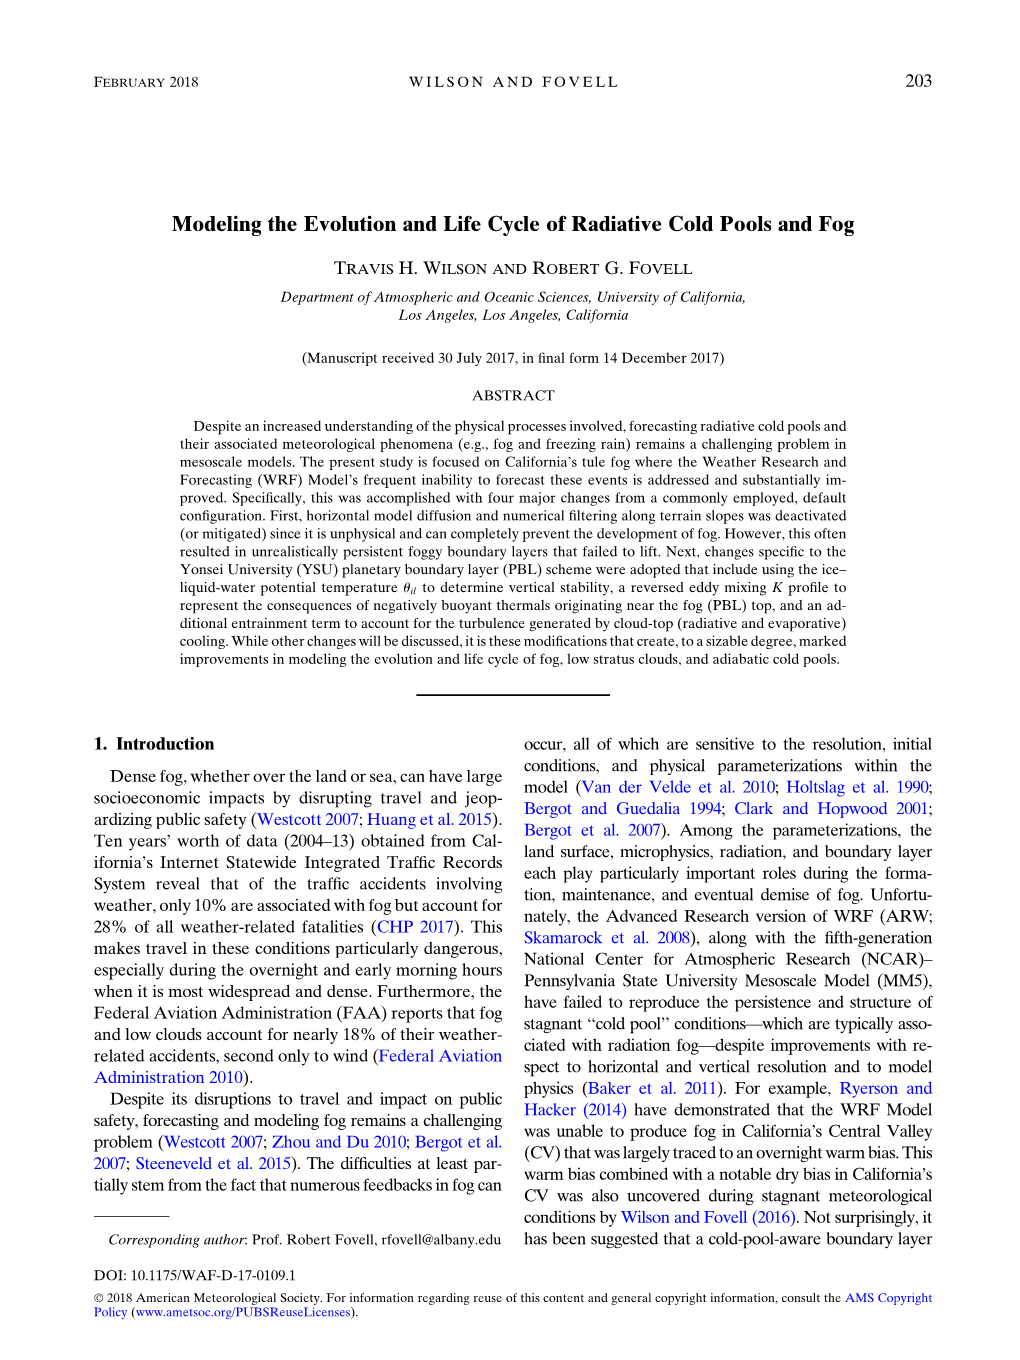 Modeling the Evolution and Life Cycle of Radiative Cold Pools and Fog